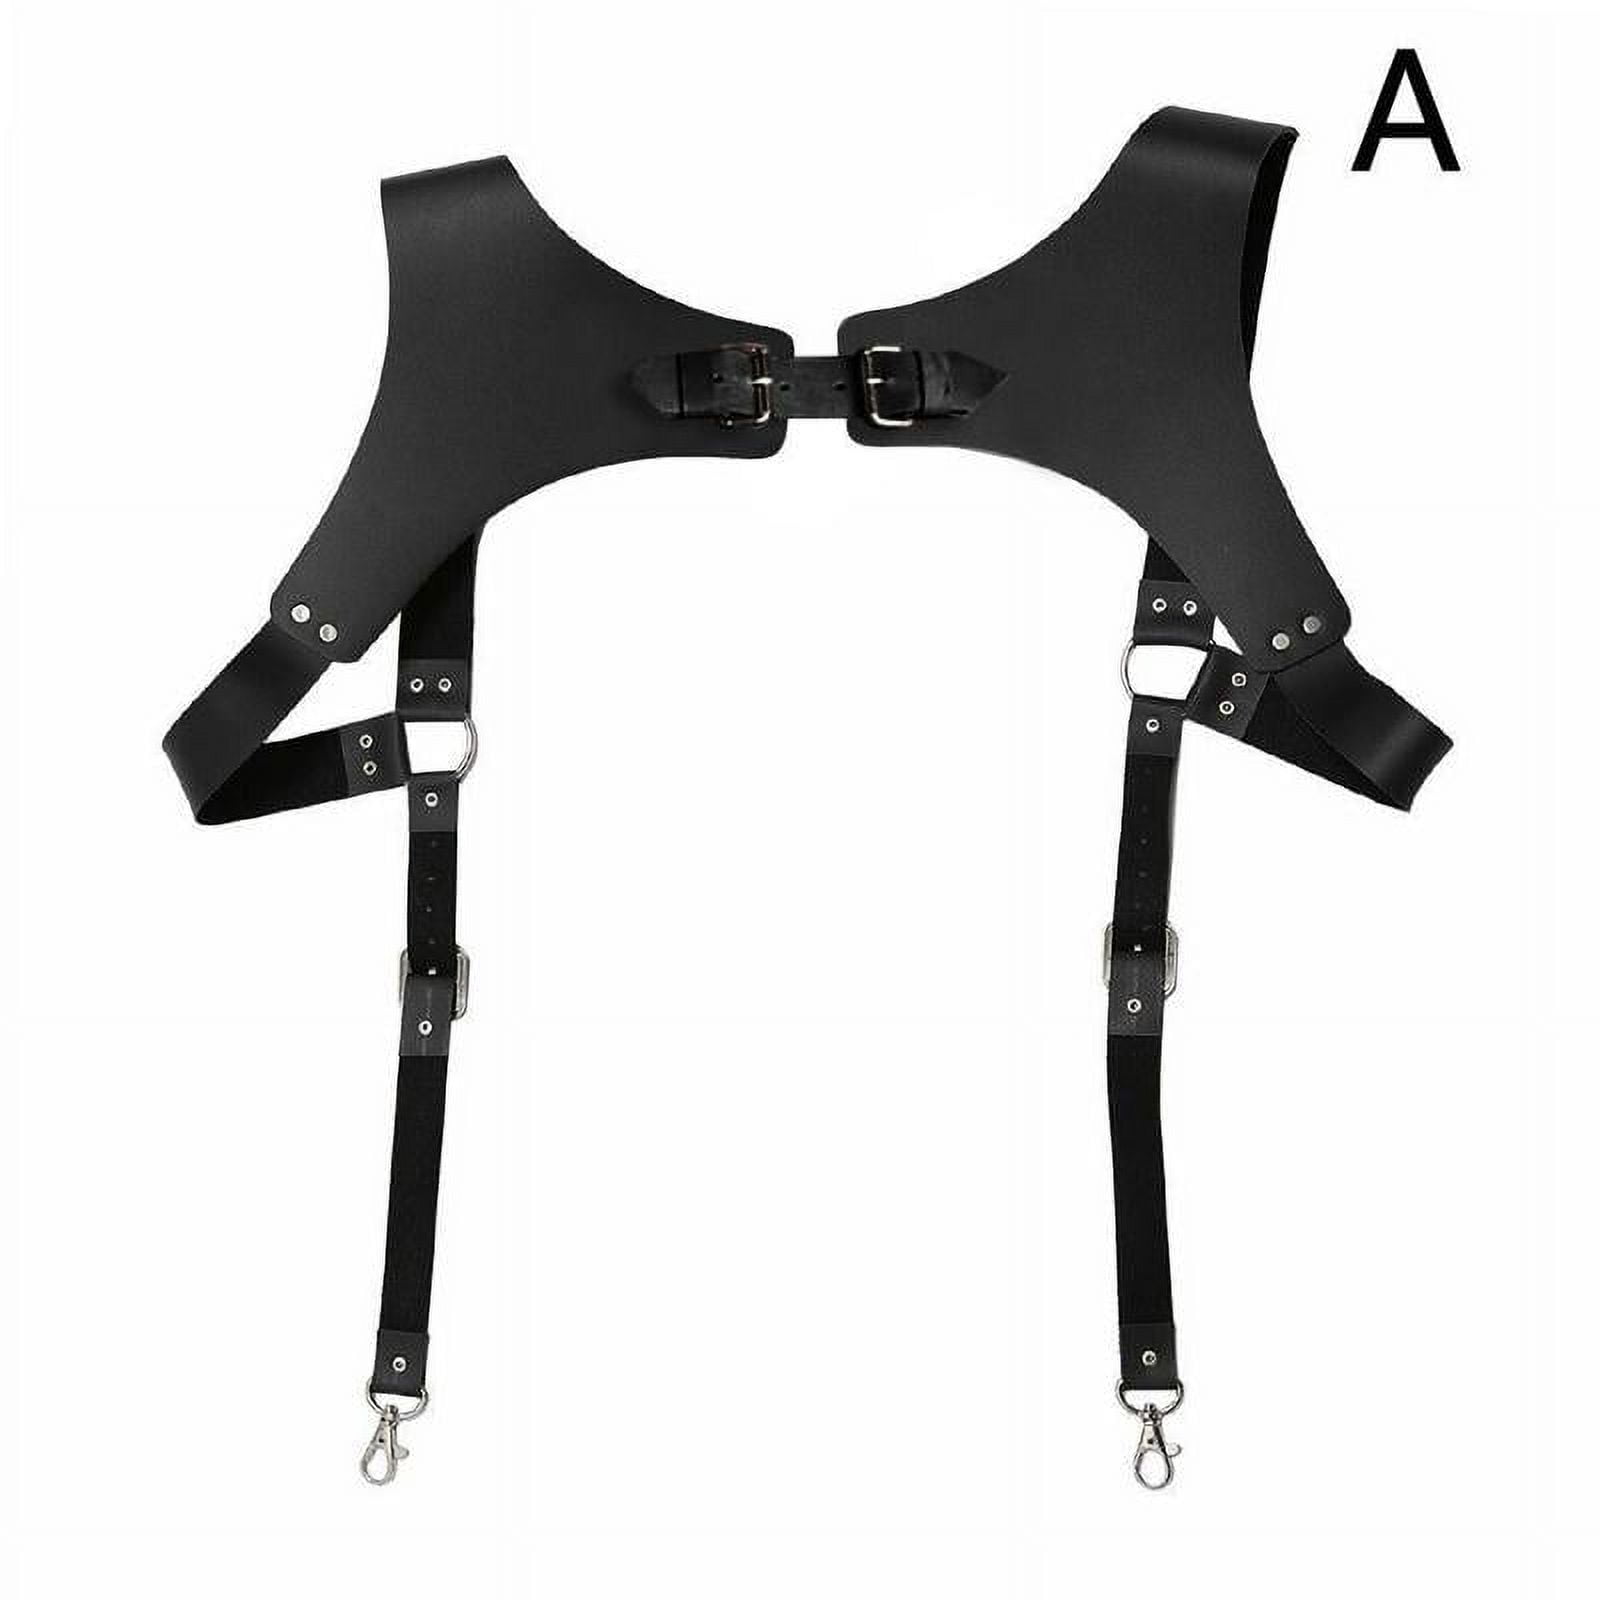 Harness Leather Chest PU Adjustable Buckle Body Costume Male Punk Fashion  Gothic Metal Chain Halter …See more Harness Leather Chest PU Adjustable